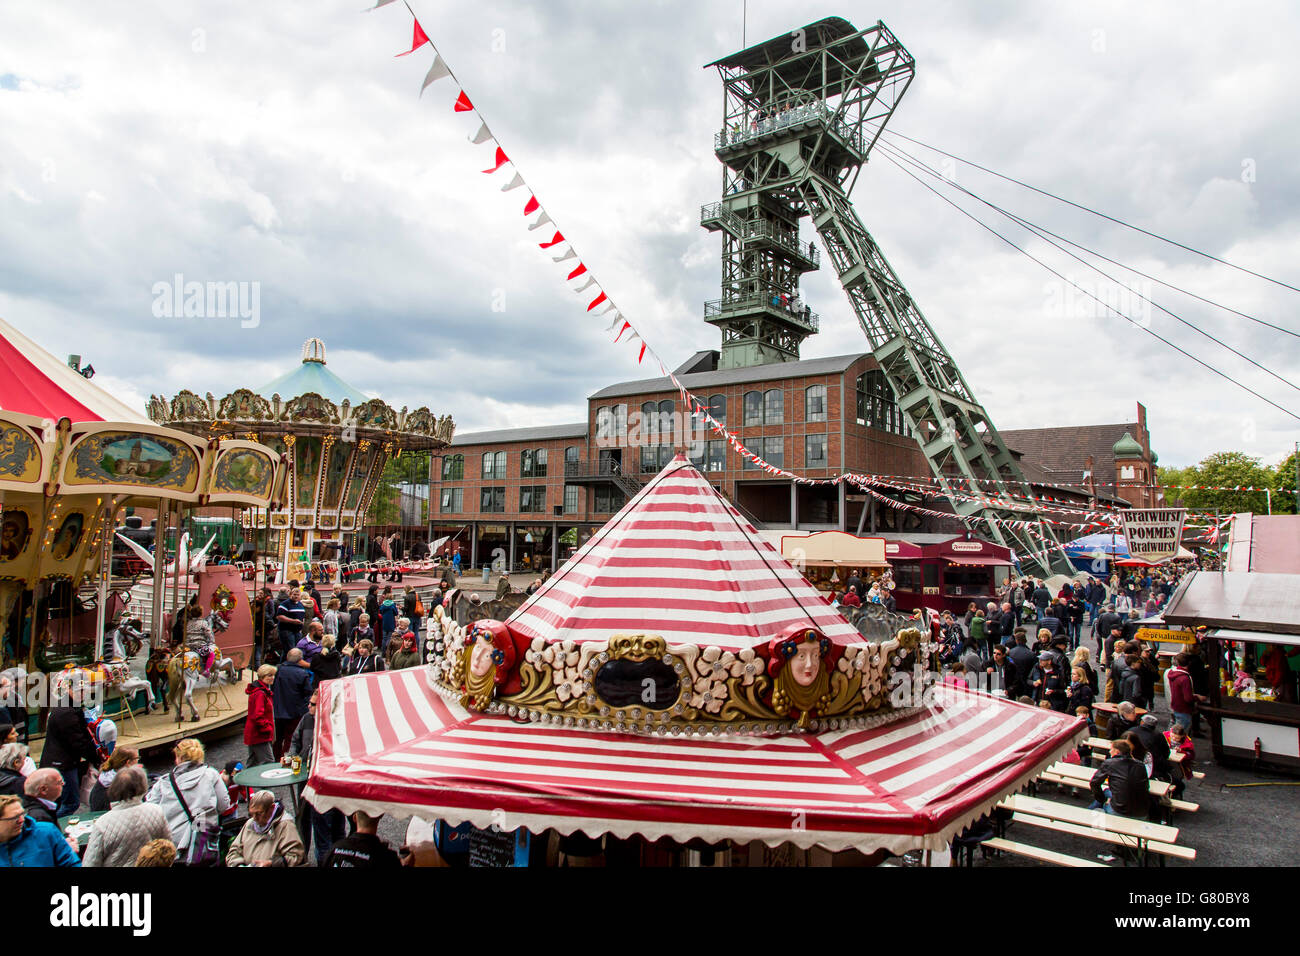 Historical fair in the grounds of Zeche Zollern, an old industry museum on the ground of a former colliery  in Dortmund, Stock Photo